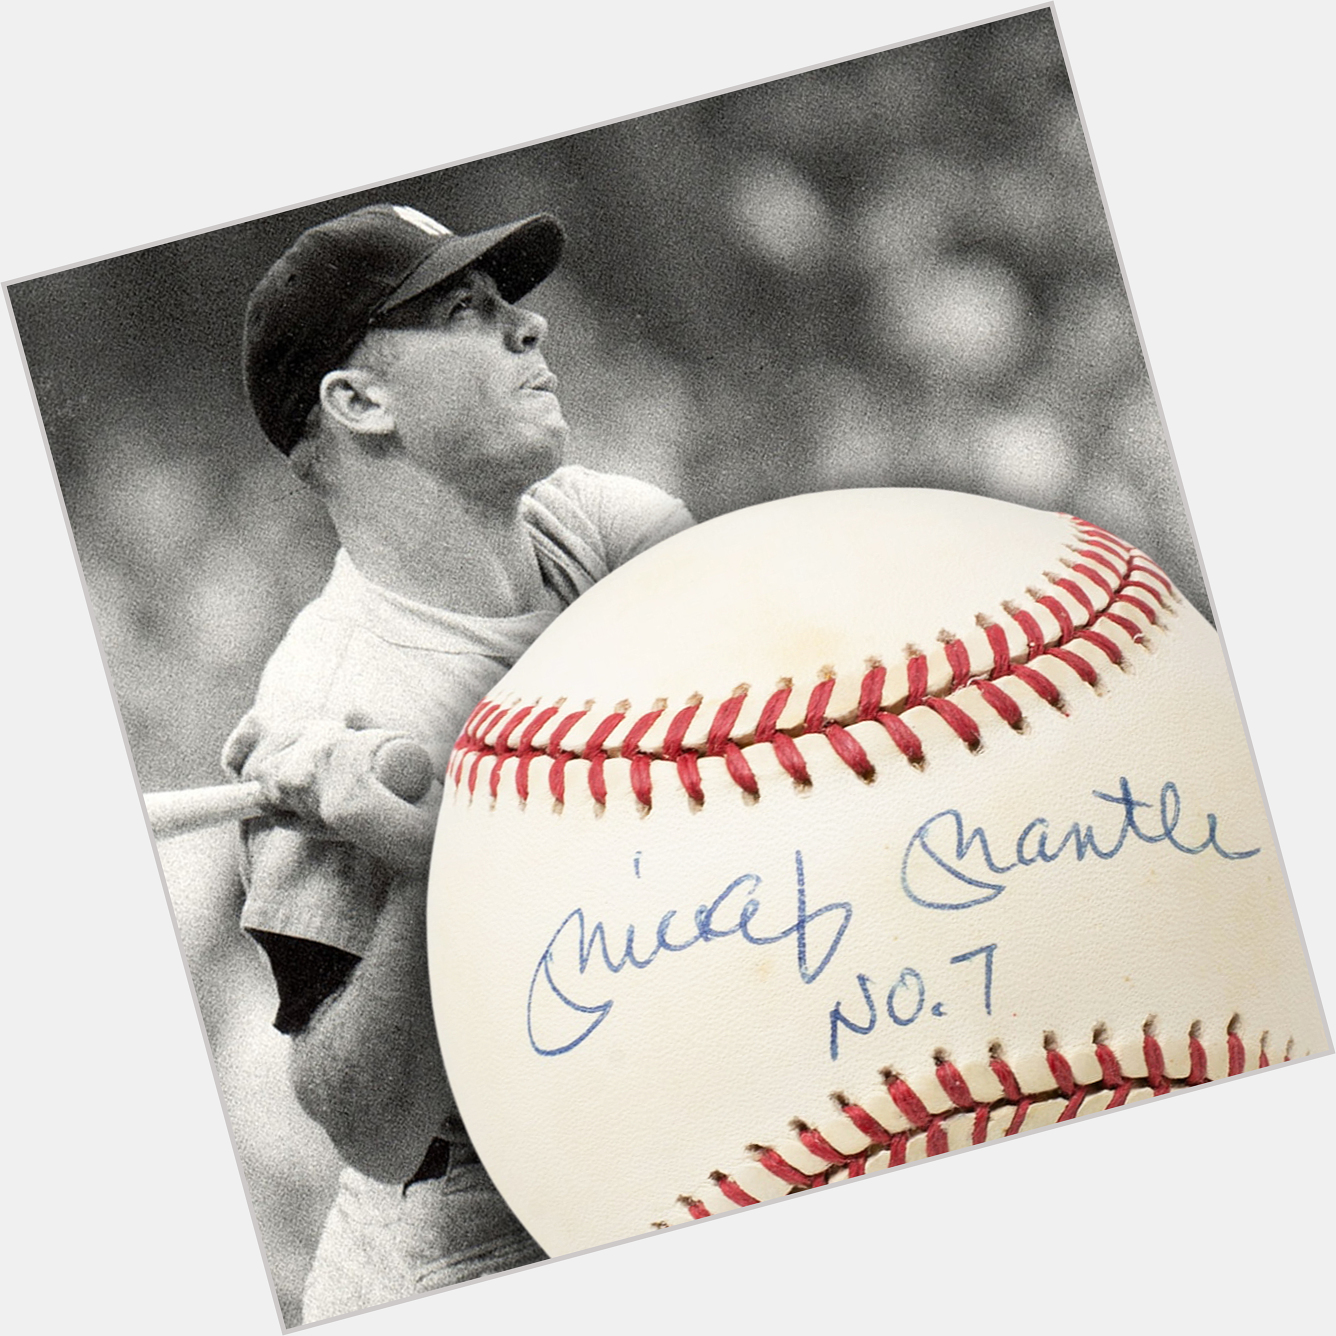 Share this post to wish Mickey Mantle a happy birthday!  - 